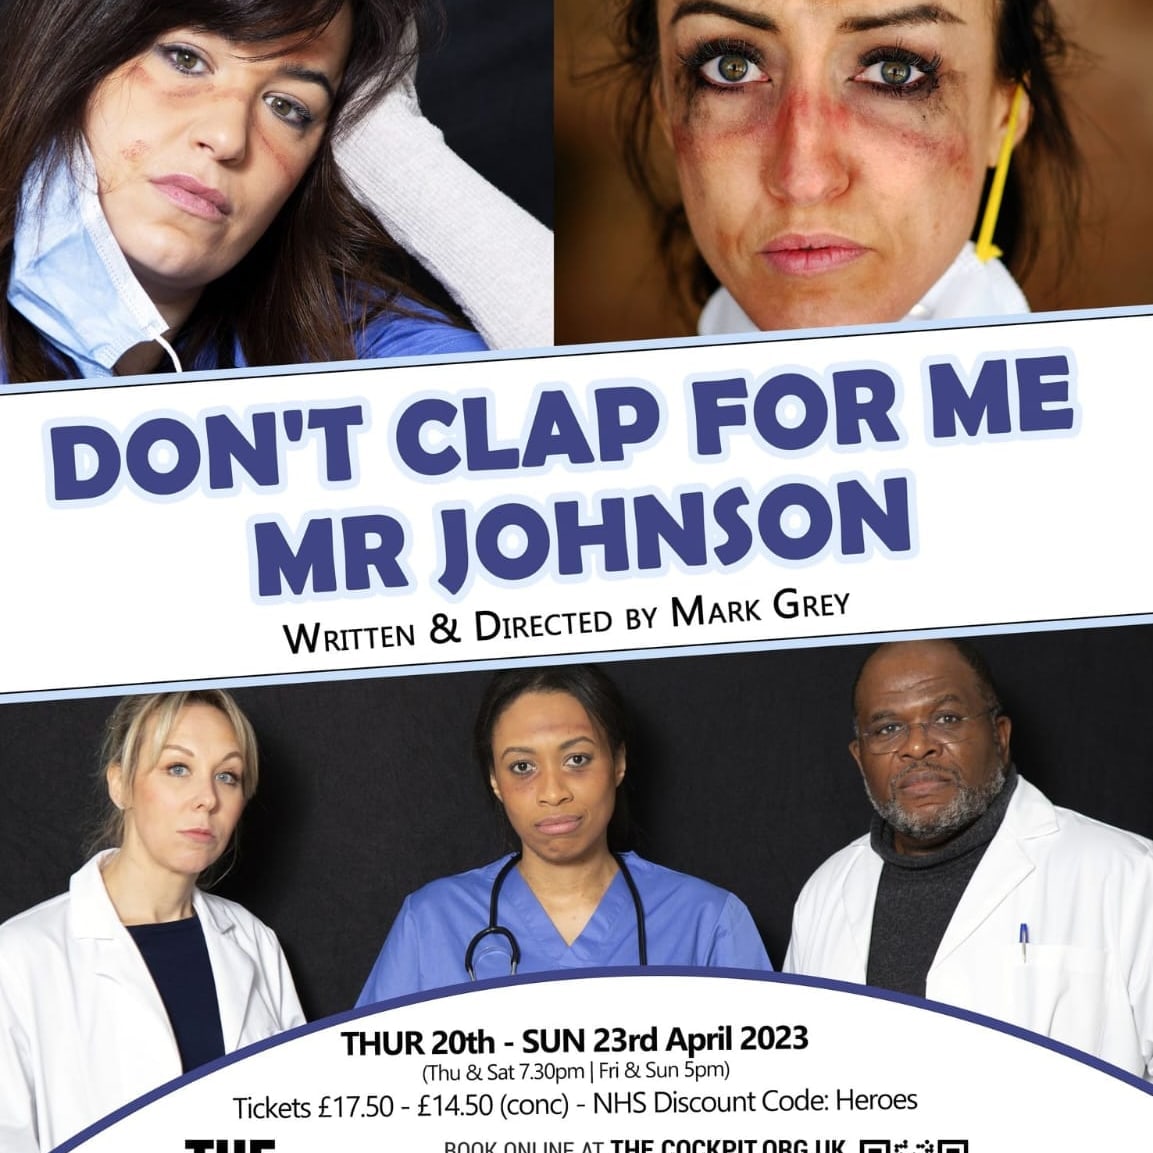 Don’t Clap For Me Mr. Johnson  by Mark Grey